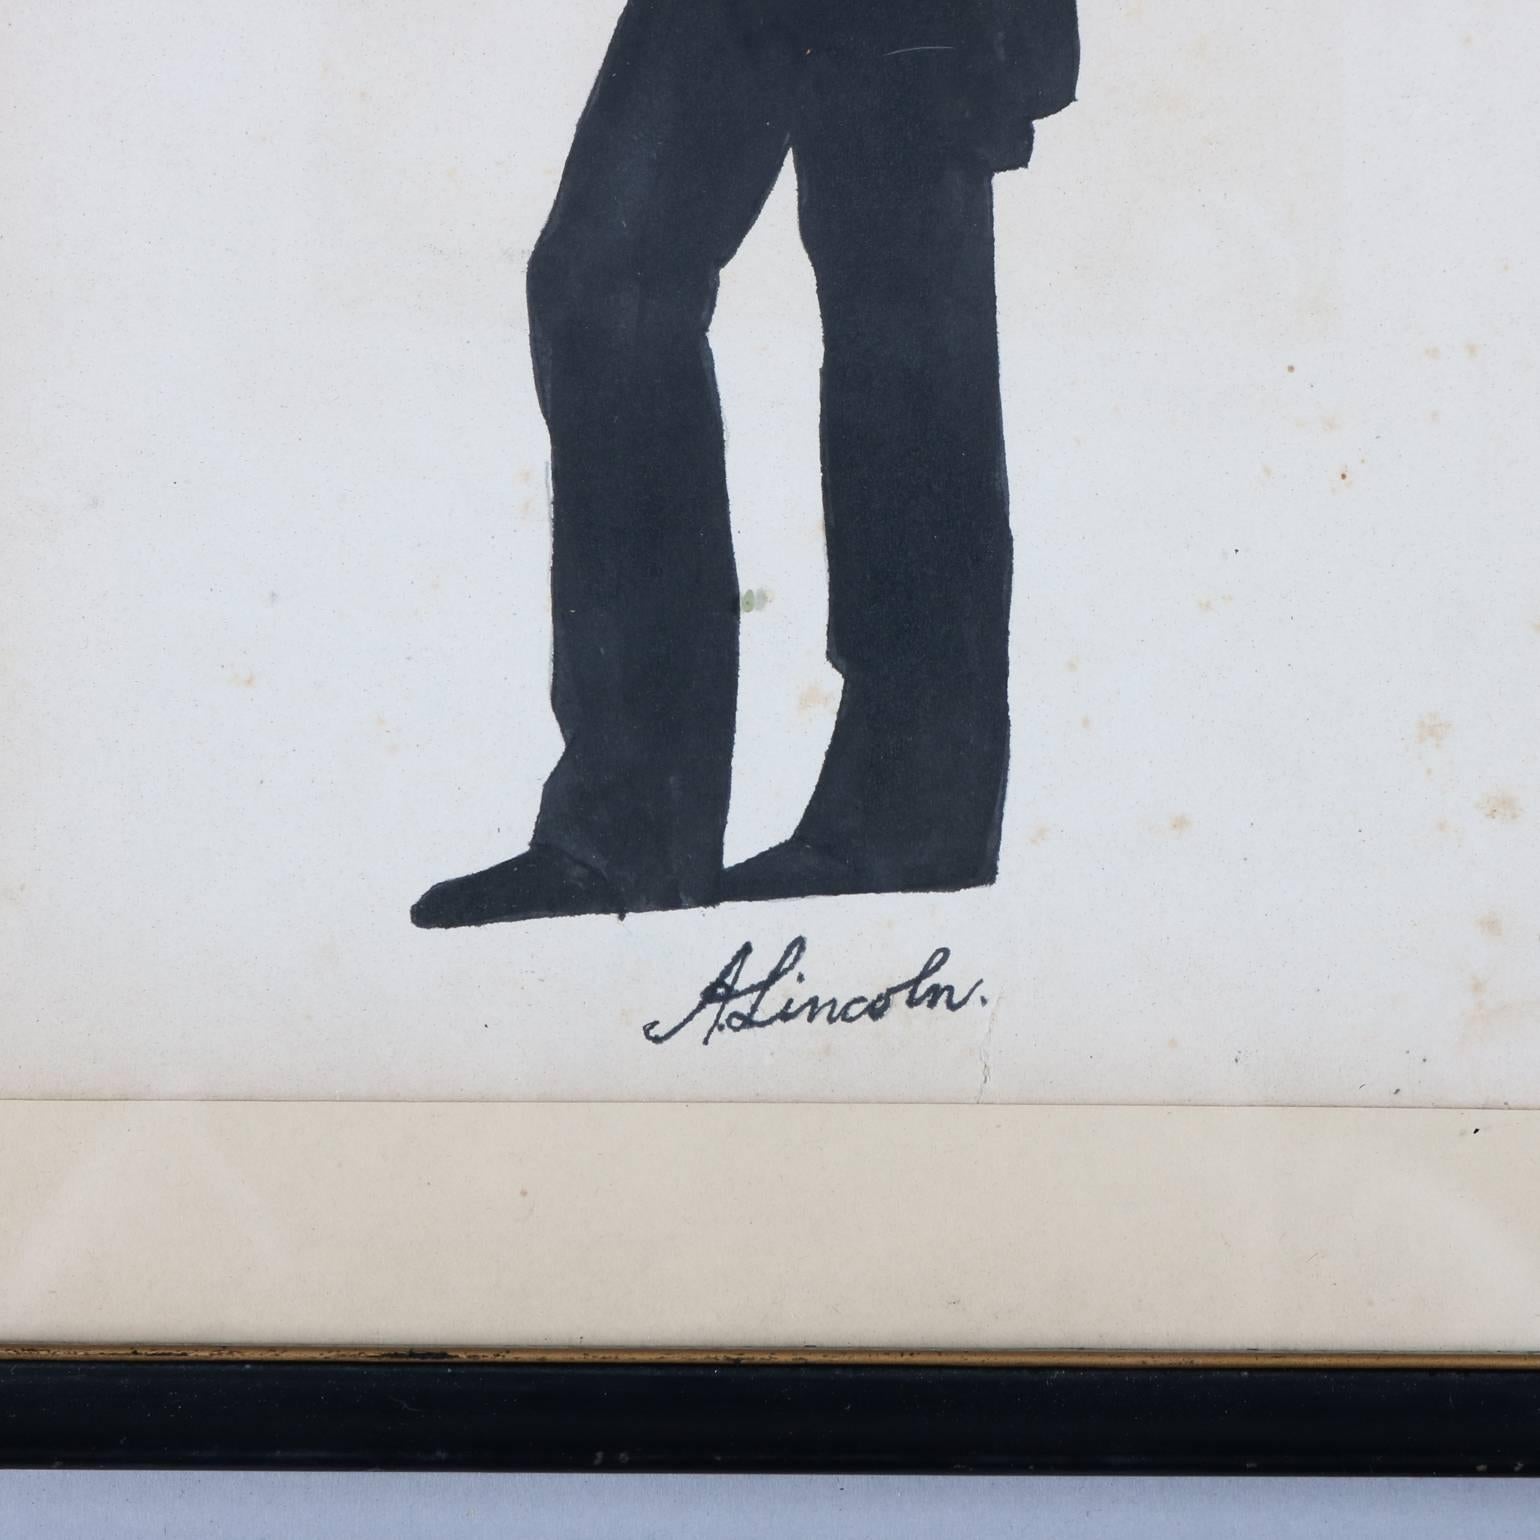 Set of three full length silhouettes of United States Presidents including George Washington, Thomas Jefferson, and Abraham (Abe) Lincoln, titles on each in pen and ink script, circa 1900

Measures: 13.75" H x 10" W, largest.